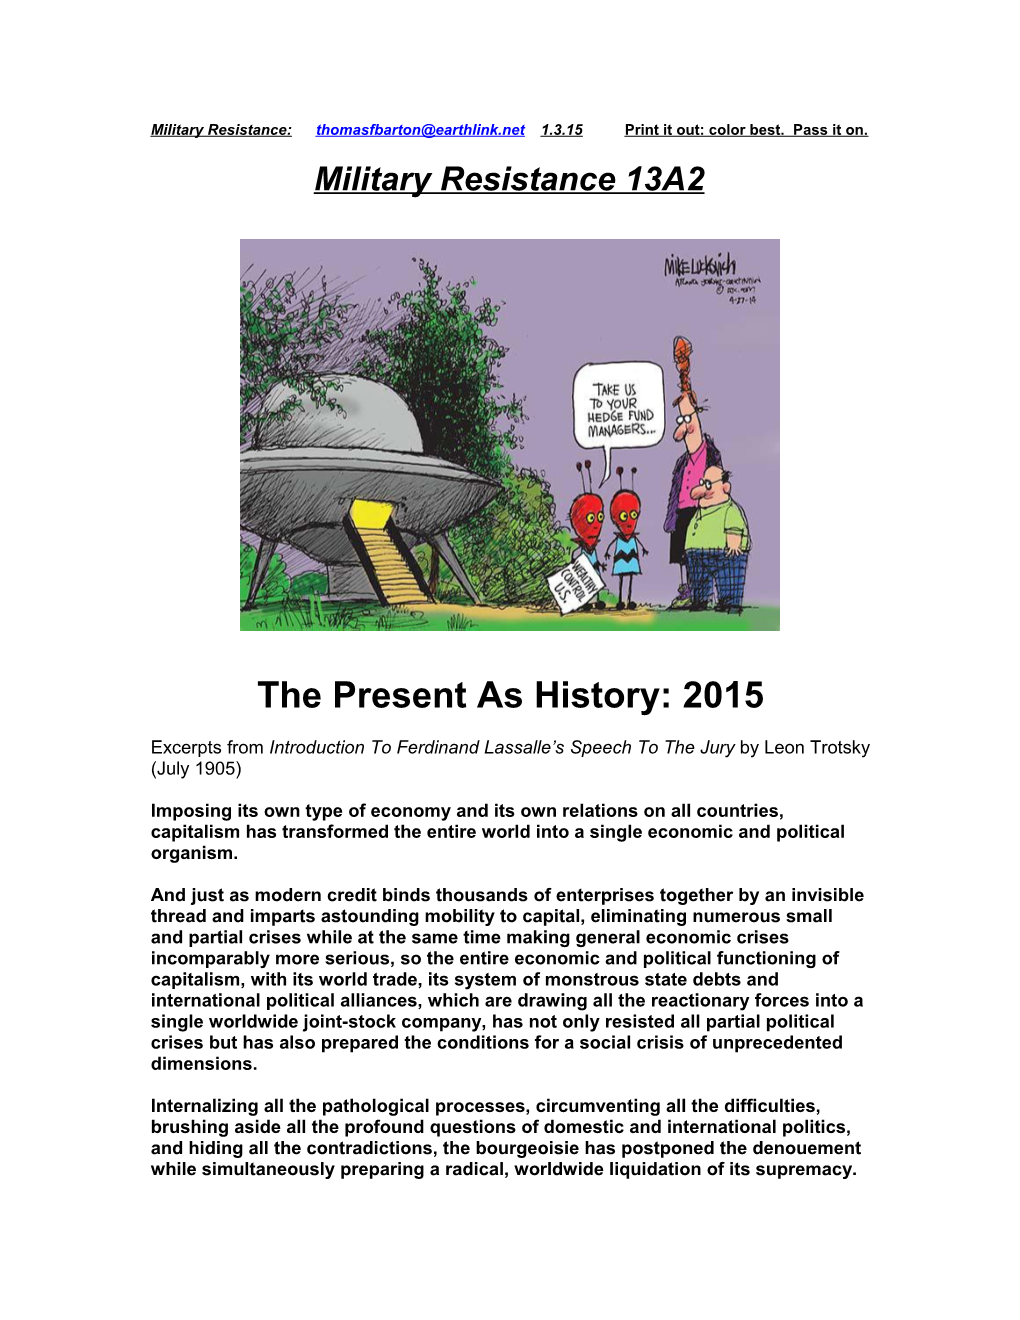 Military Resistance 13A2